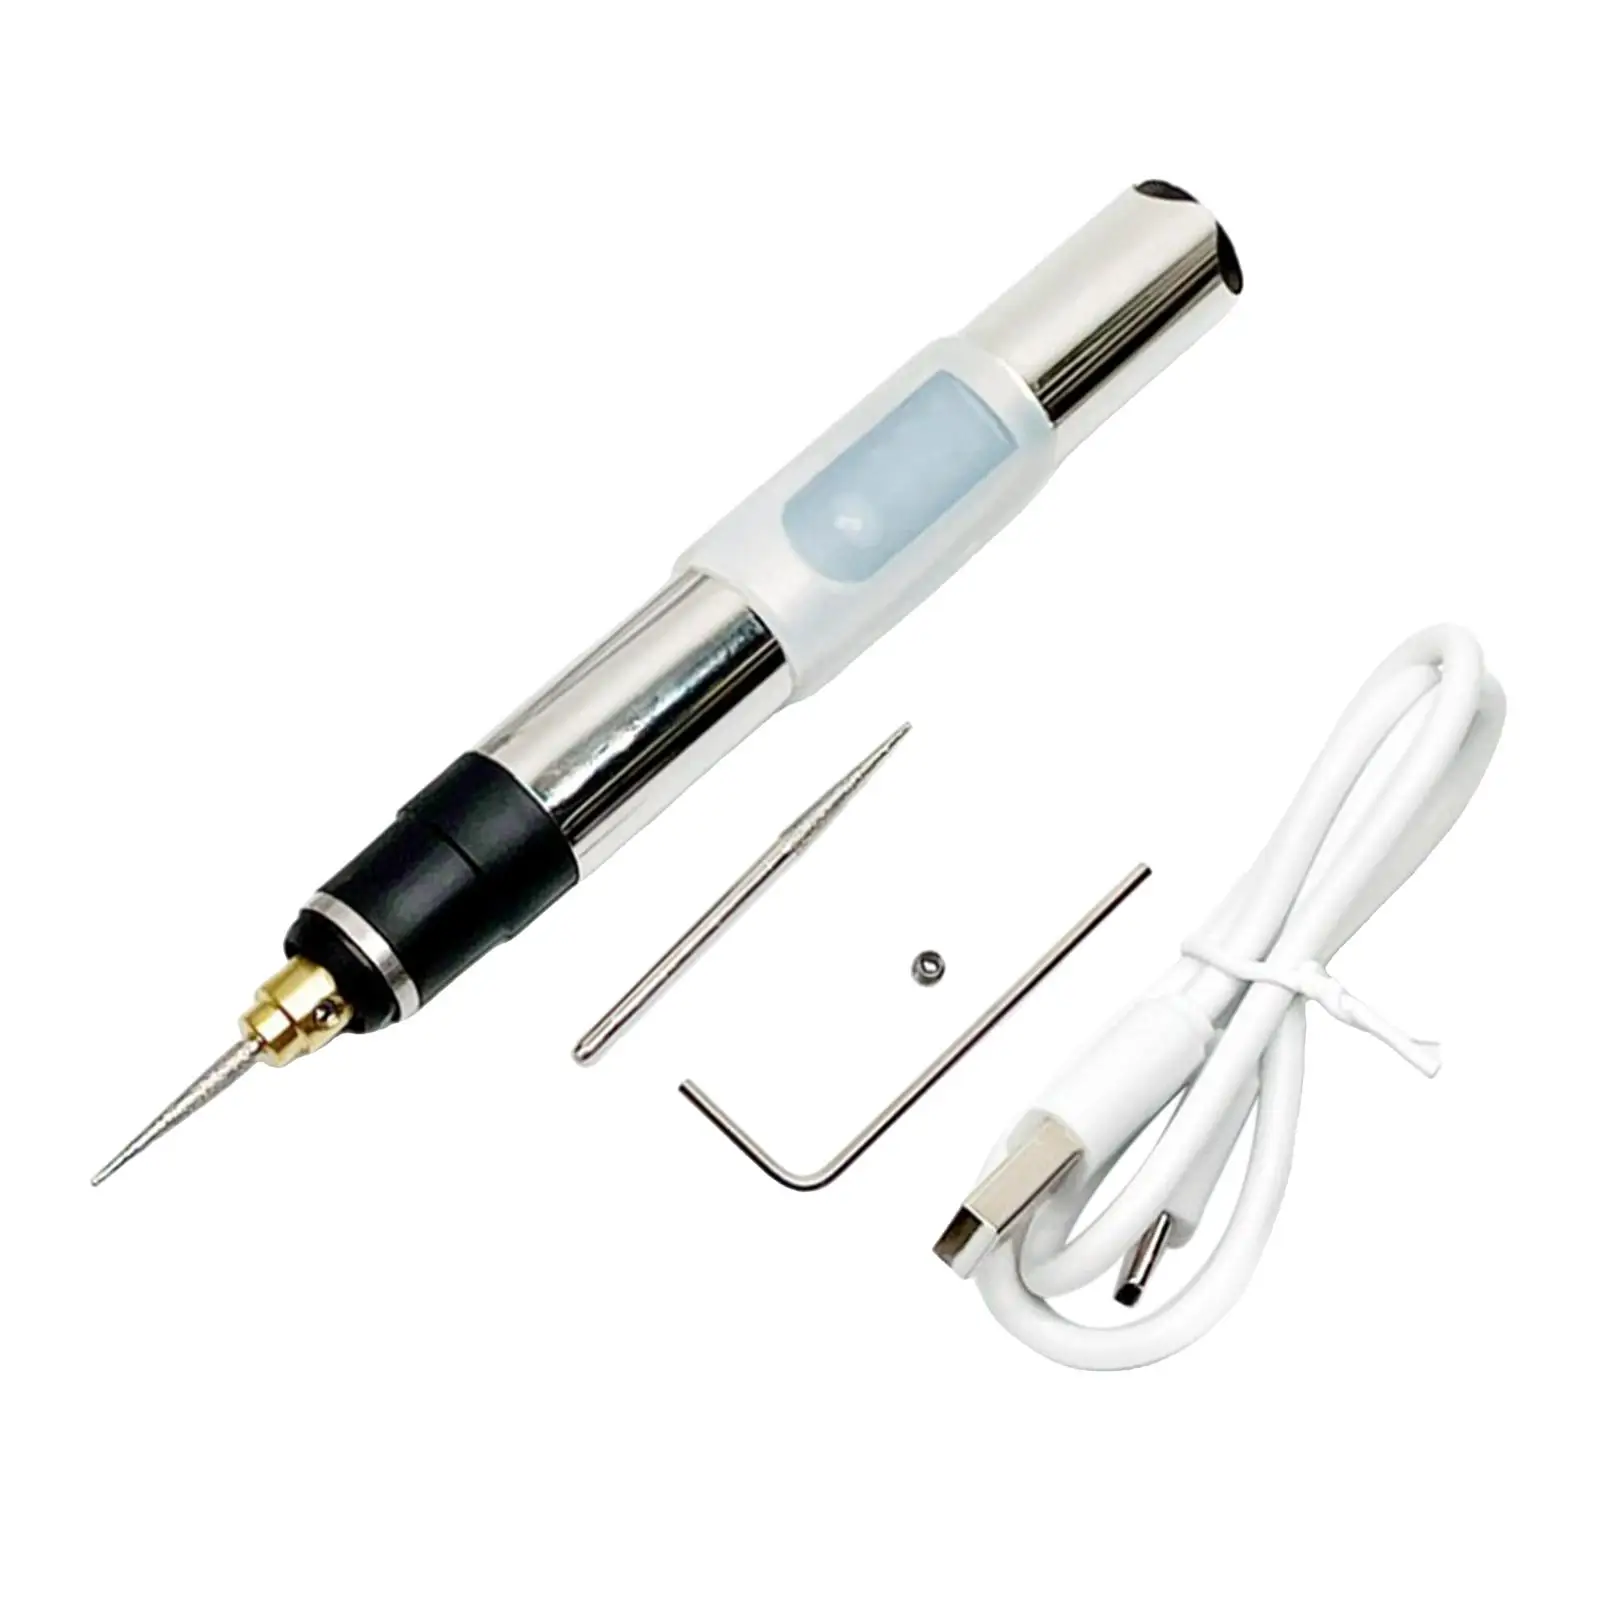 Electric Etching Pen Adjustable Speed Cutter Tool Engraving Tool Kit for Jewelry/ Wood/ Glass/ Ceramic/ Metal